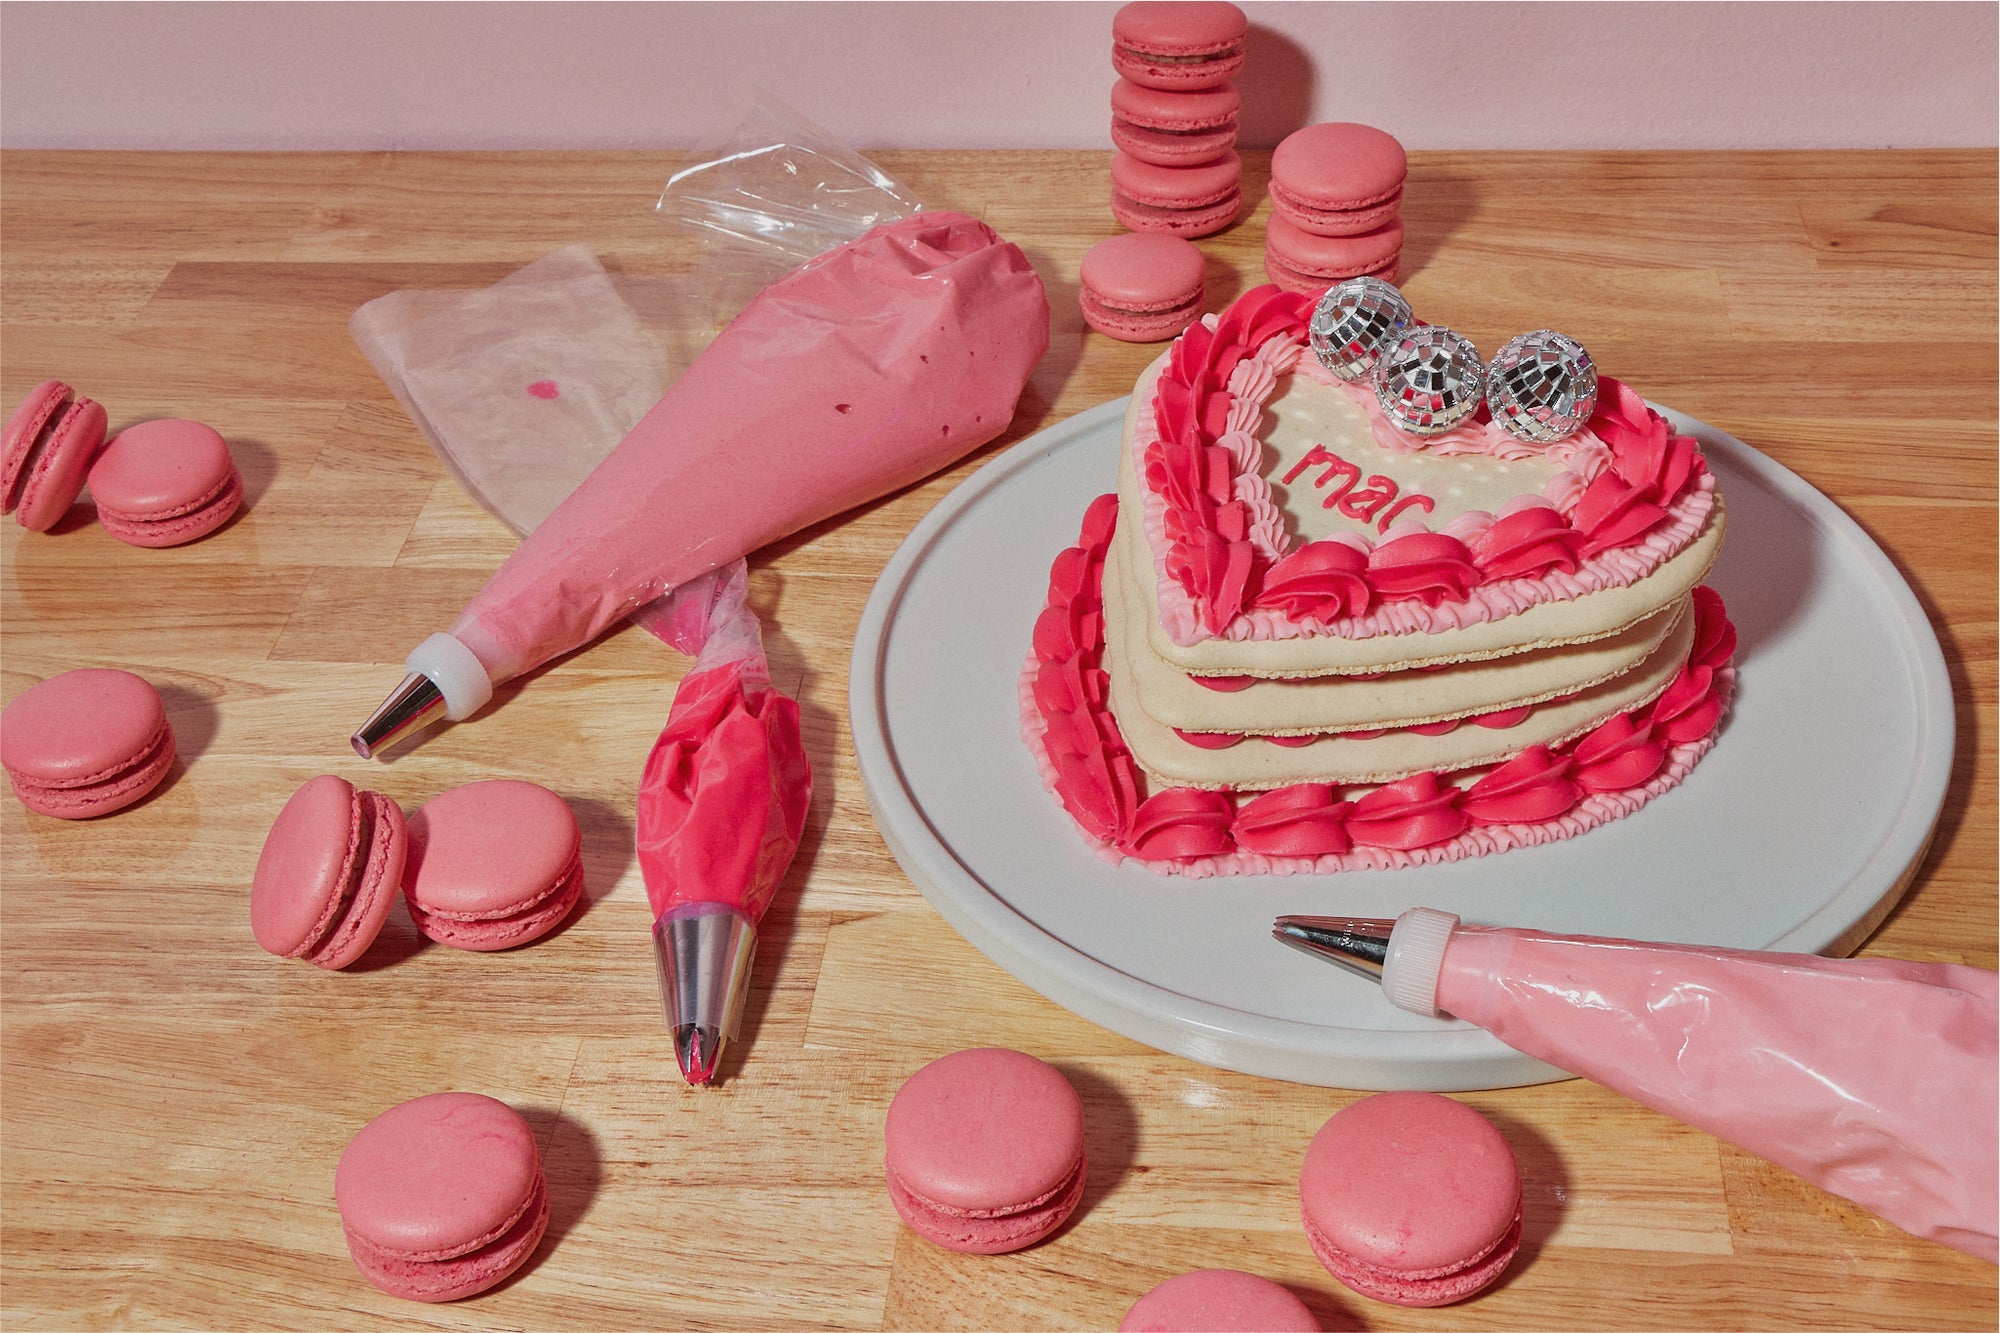 One of Maddie About Cake's signature heart-shaped macaron cakes, complete with pink icing and mini disco balls, surrounded by piping bags of icing and strawberry macarons.